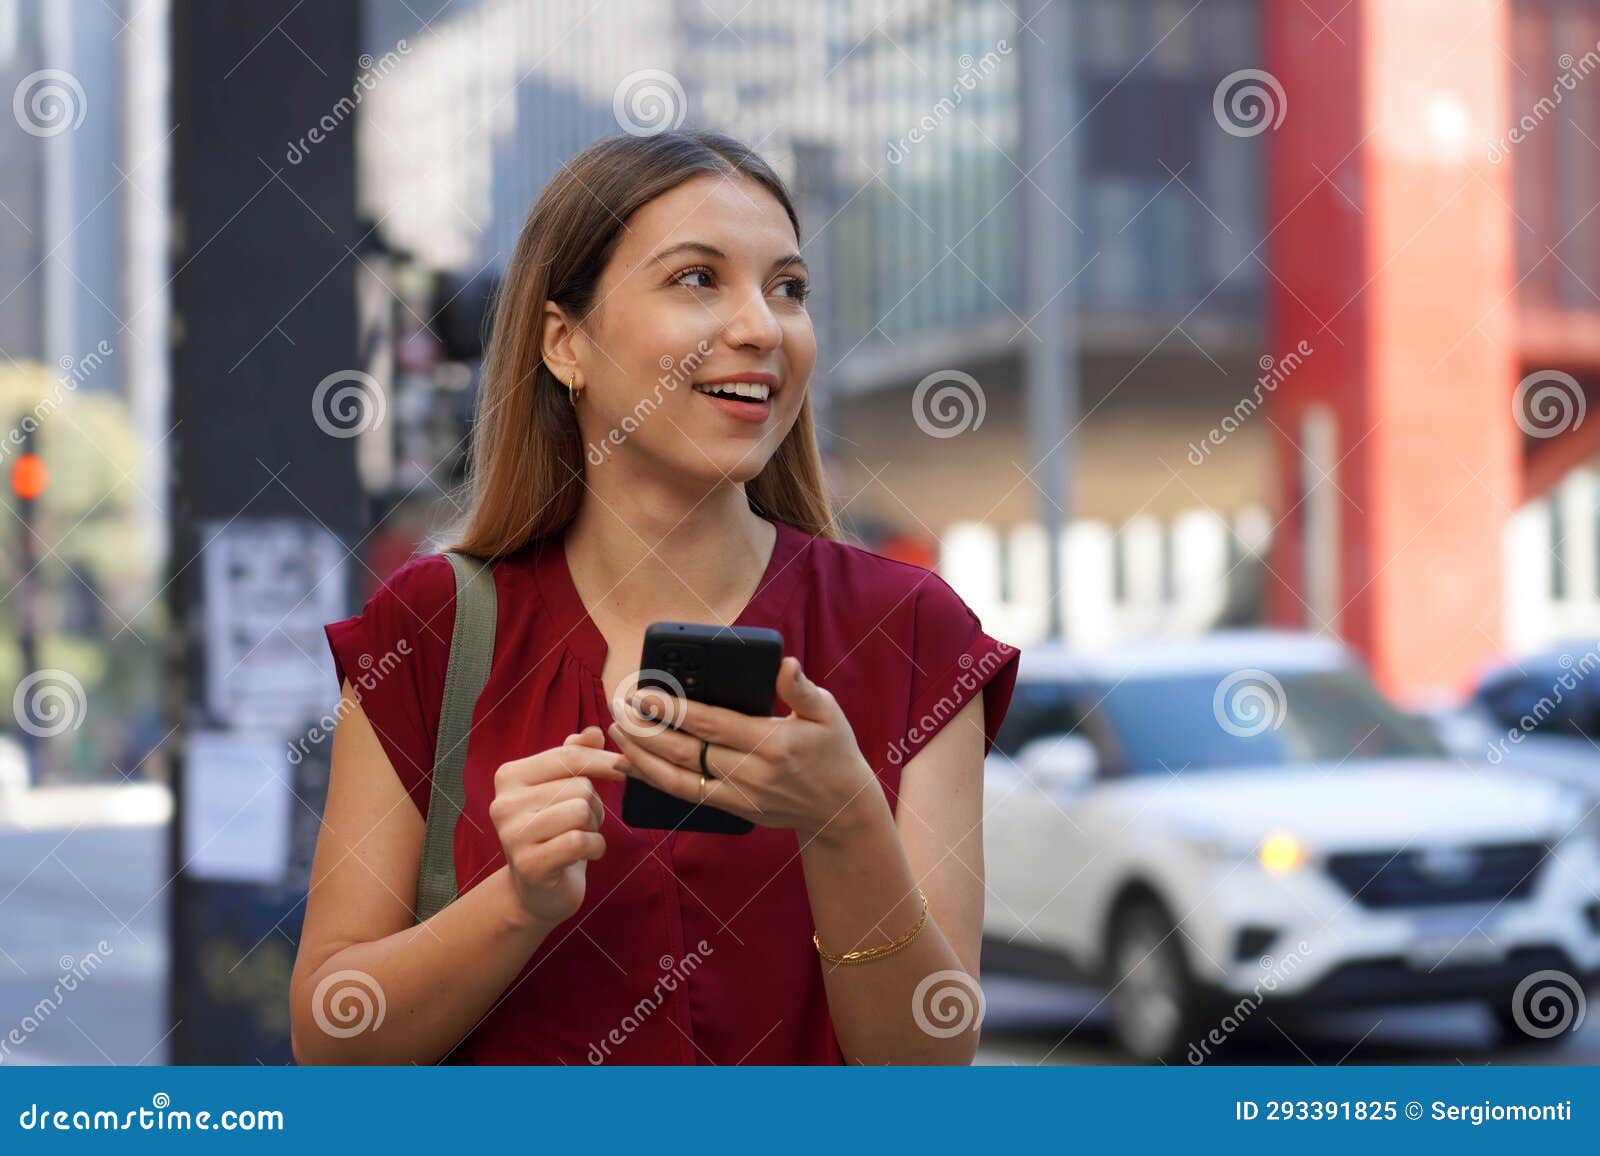 close-up of attractive brazilian business woman hail a vehicle using mobile app looking to the side on paulista avenue, sao paulo